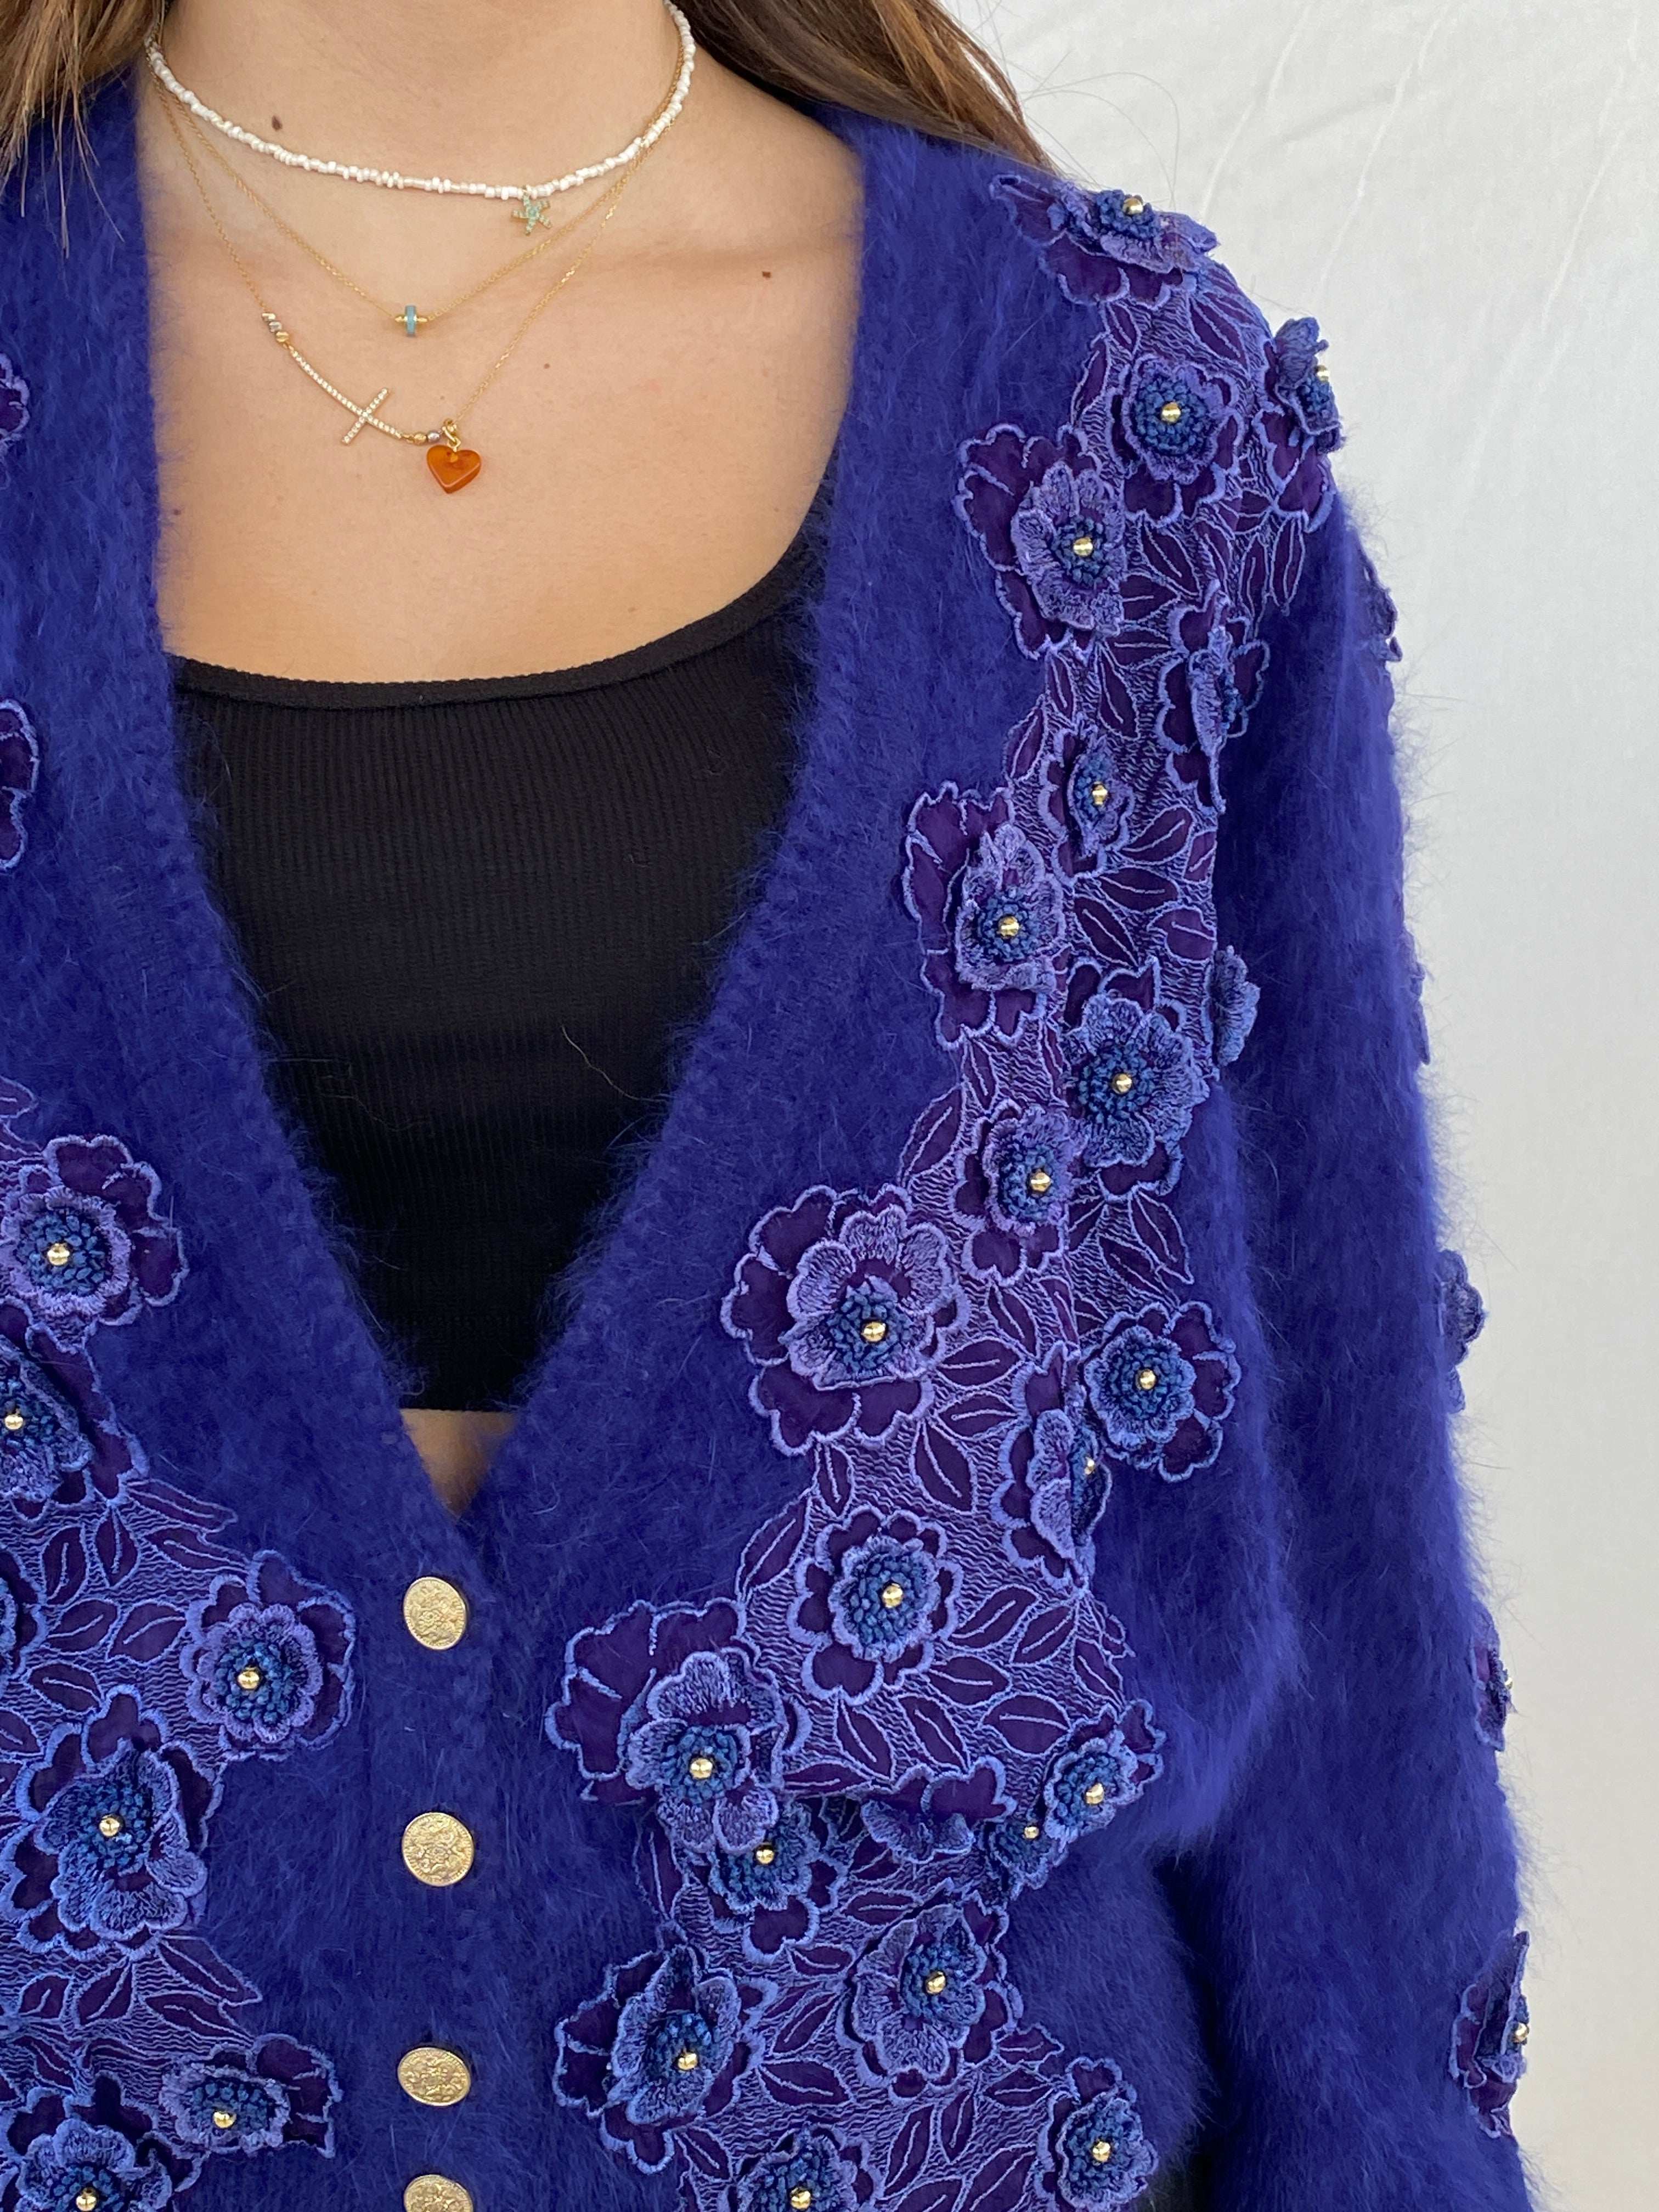 Vintage New Fashion Floral Embroidered Cardigan - Balagan Vintage Cardigan 00s, 90s, cardigan, Juana, NEW IN